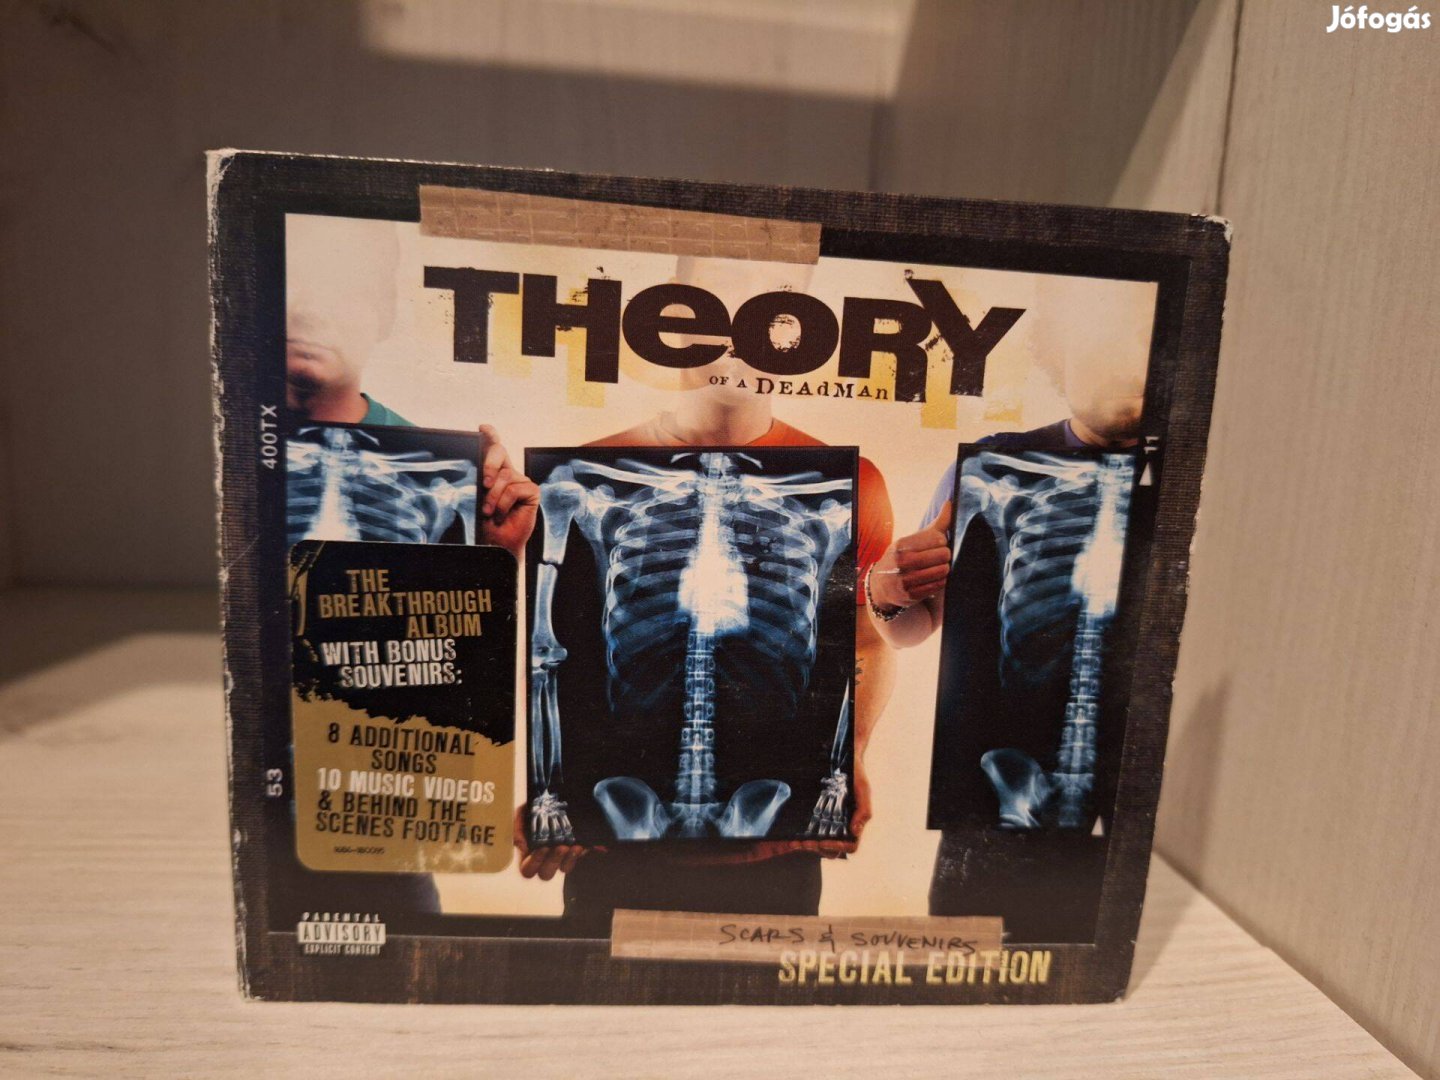 Theory Of A Deadman - Scars & Souvenirs CD + DVD Special Edition